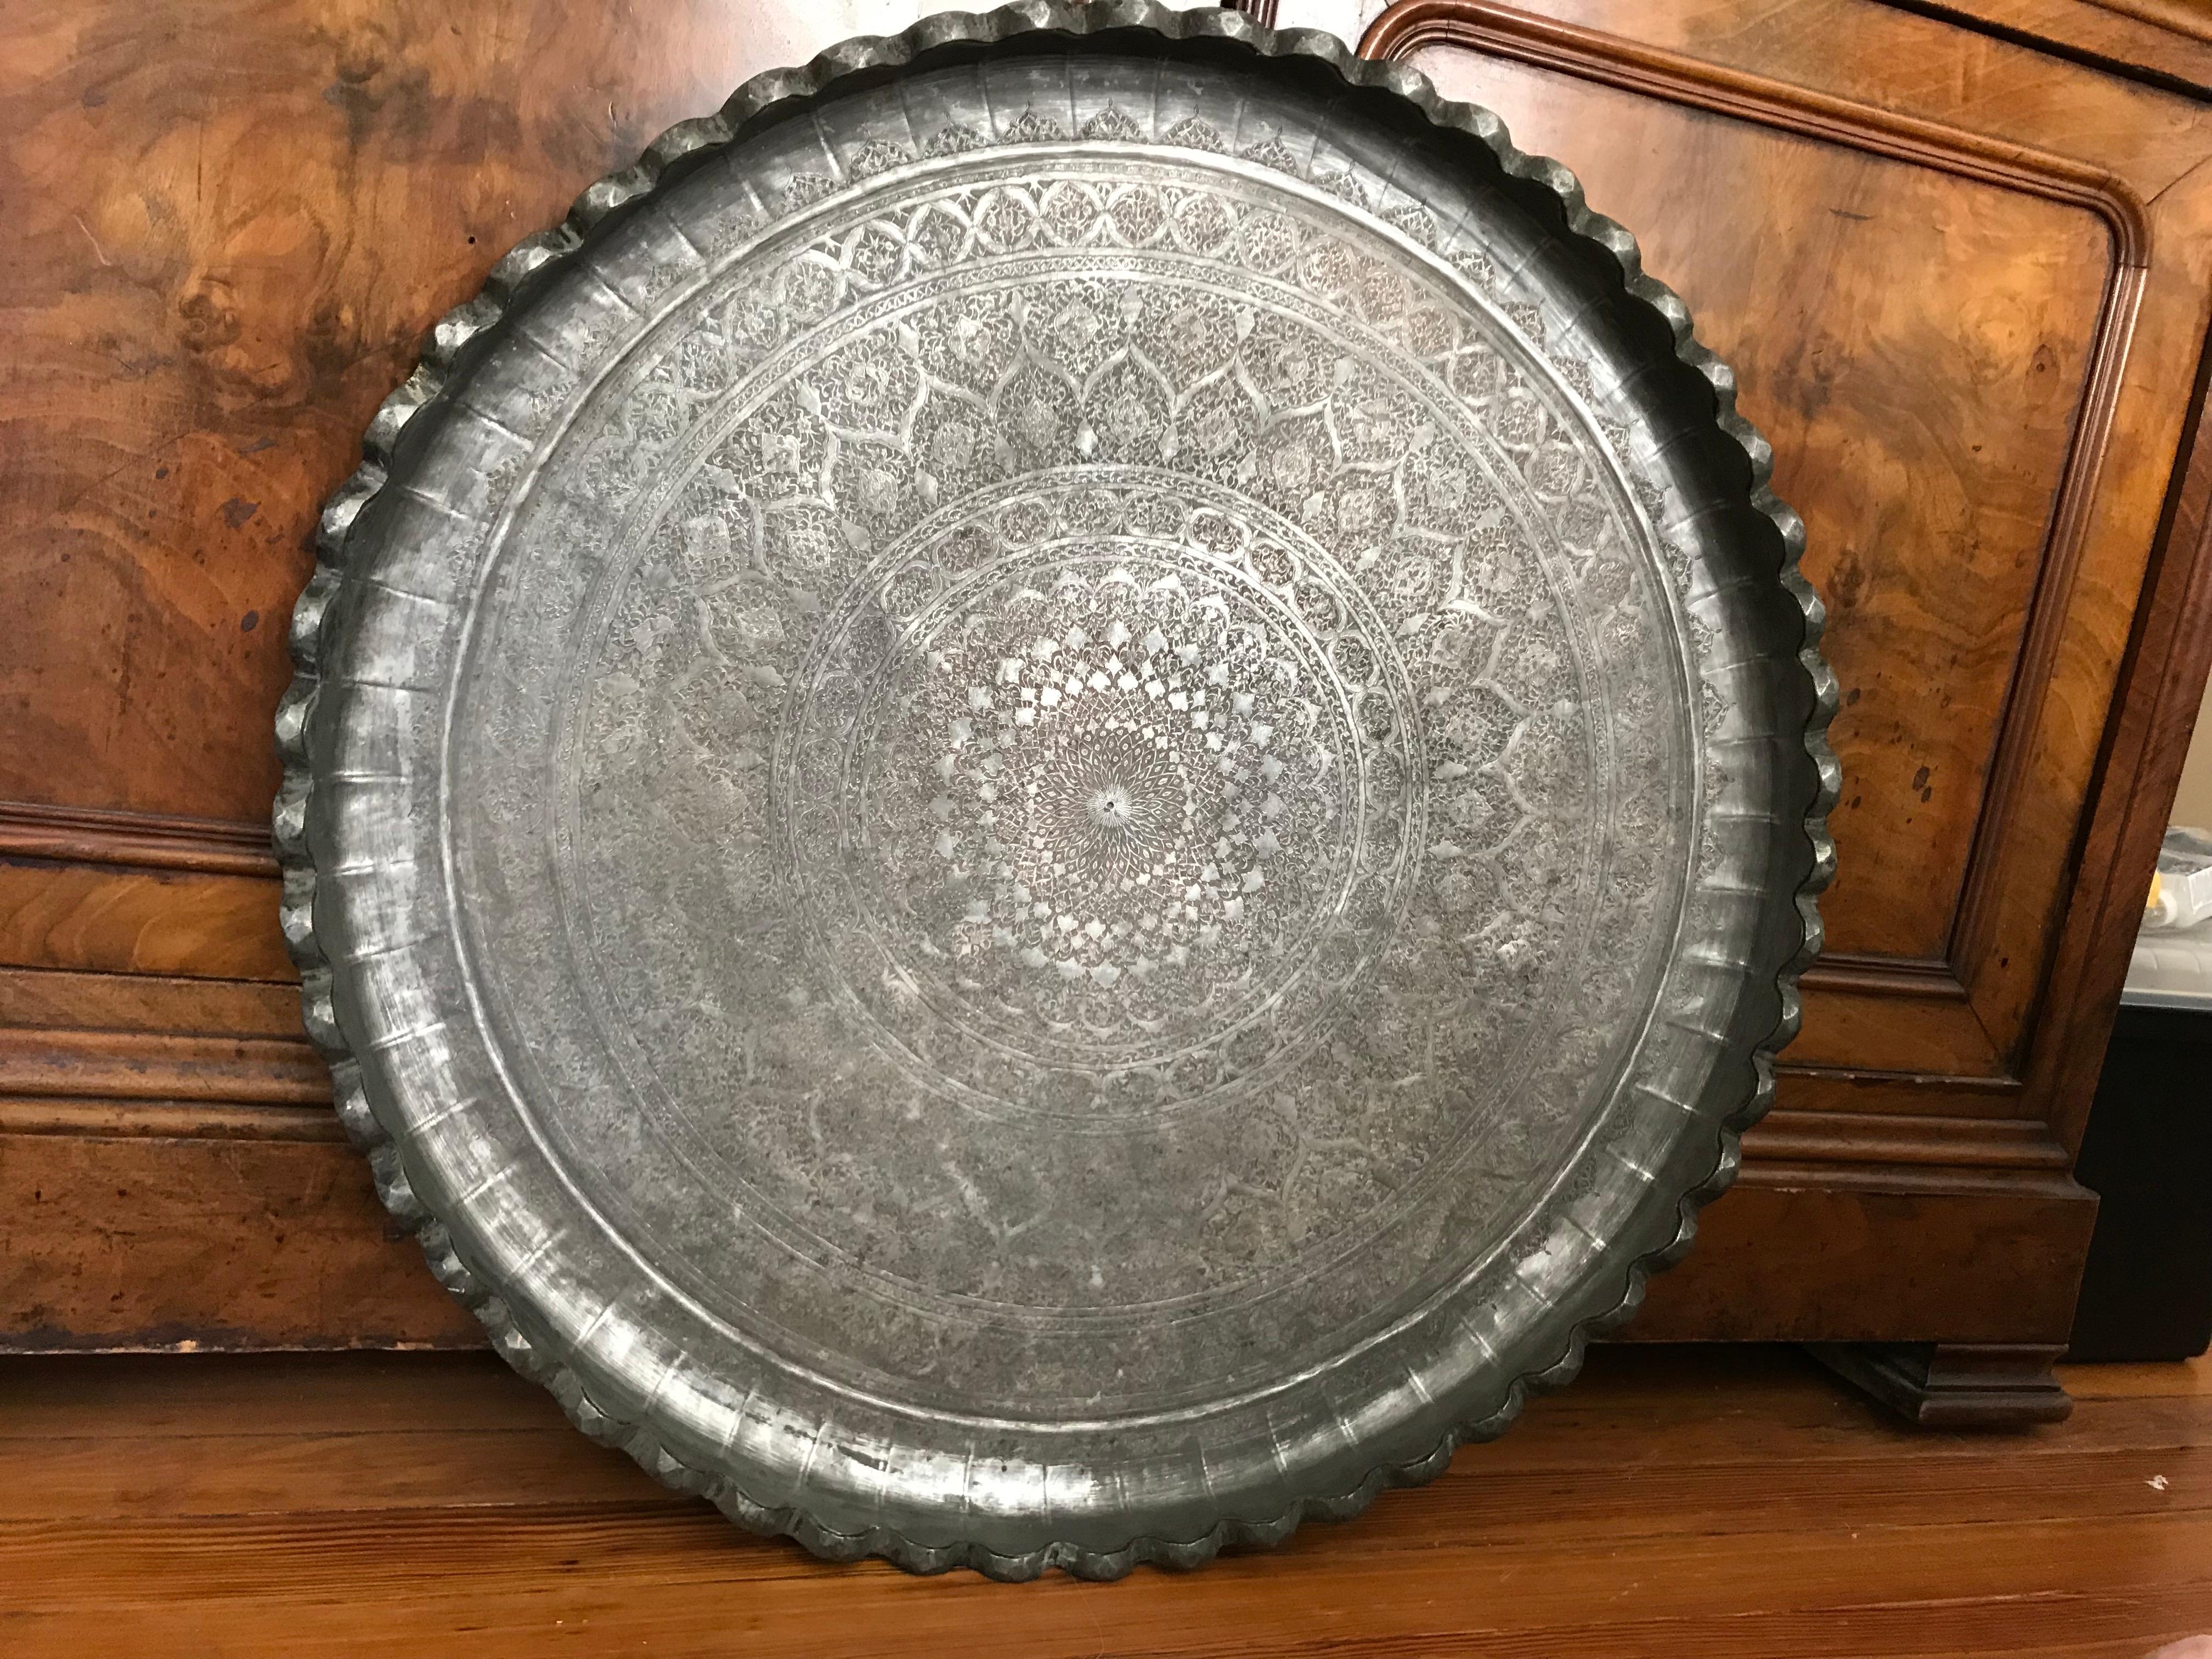 A large-scale 19th century charger with intricate incised Moorish inspired decoration throughout. With deeply scalloped hand-hammered edge , floral arabesques spiralling from the centre, birds in cartouches in an outer ring. Similar to the